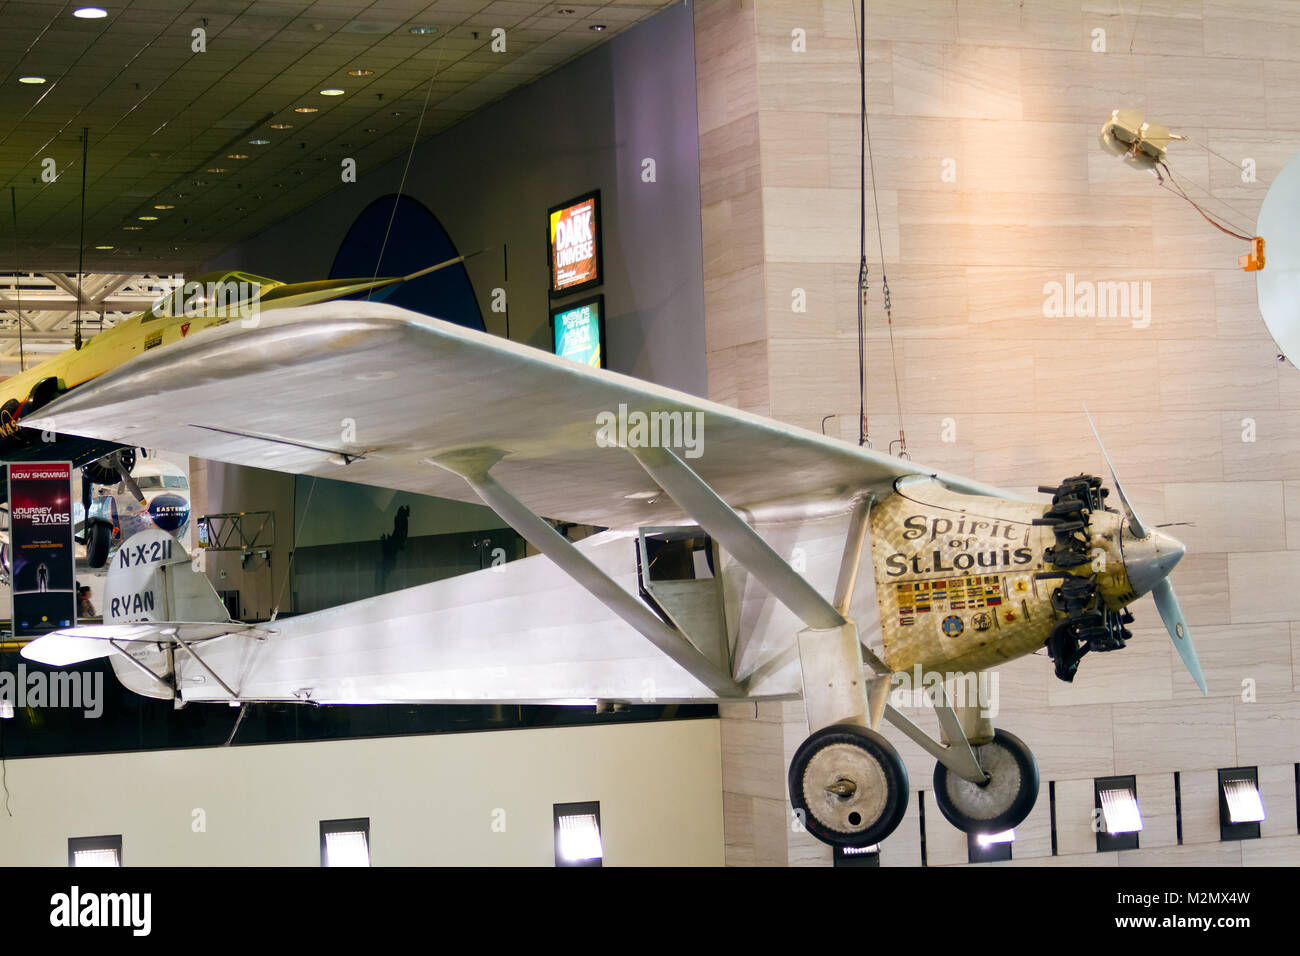 WASHINGTON D.C., USA - MAY 11, 2016: Spirit of St Louis aircraft, Charles Lindbergh at the Smithsonian National Air and Space Museum in Washington D.C Stock Photo